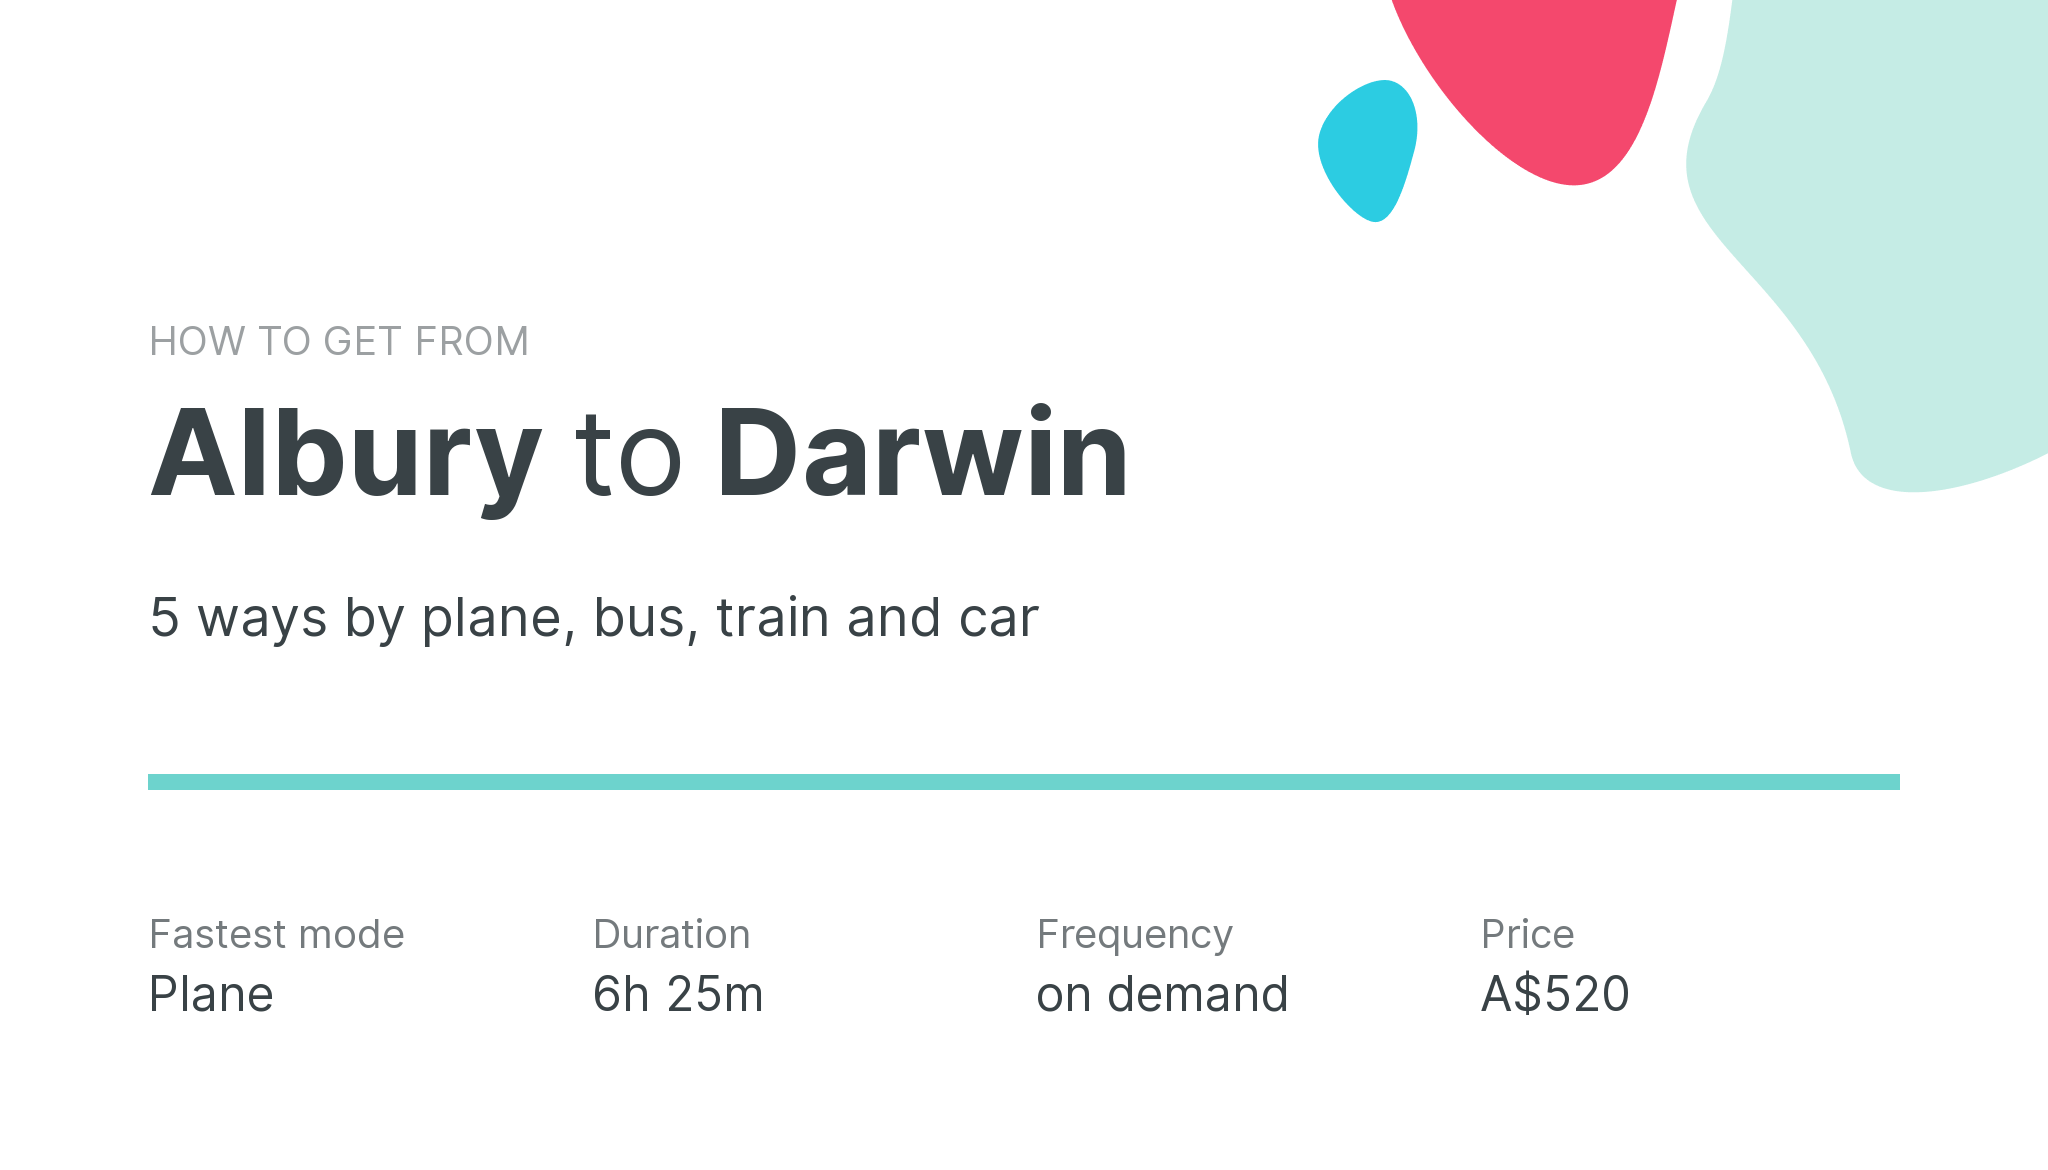 How do I get from Albury to Darwin